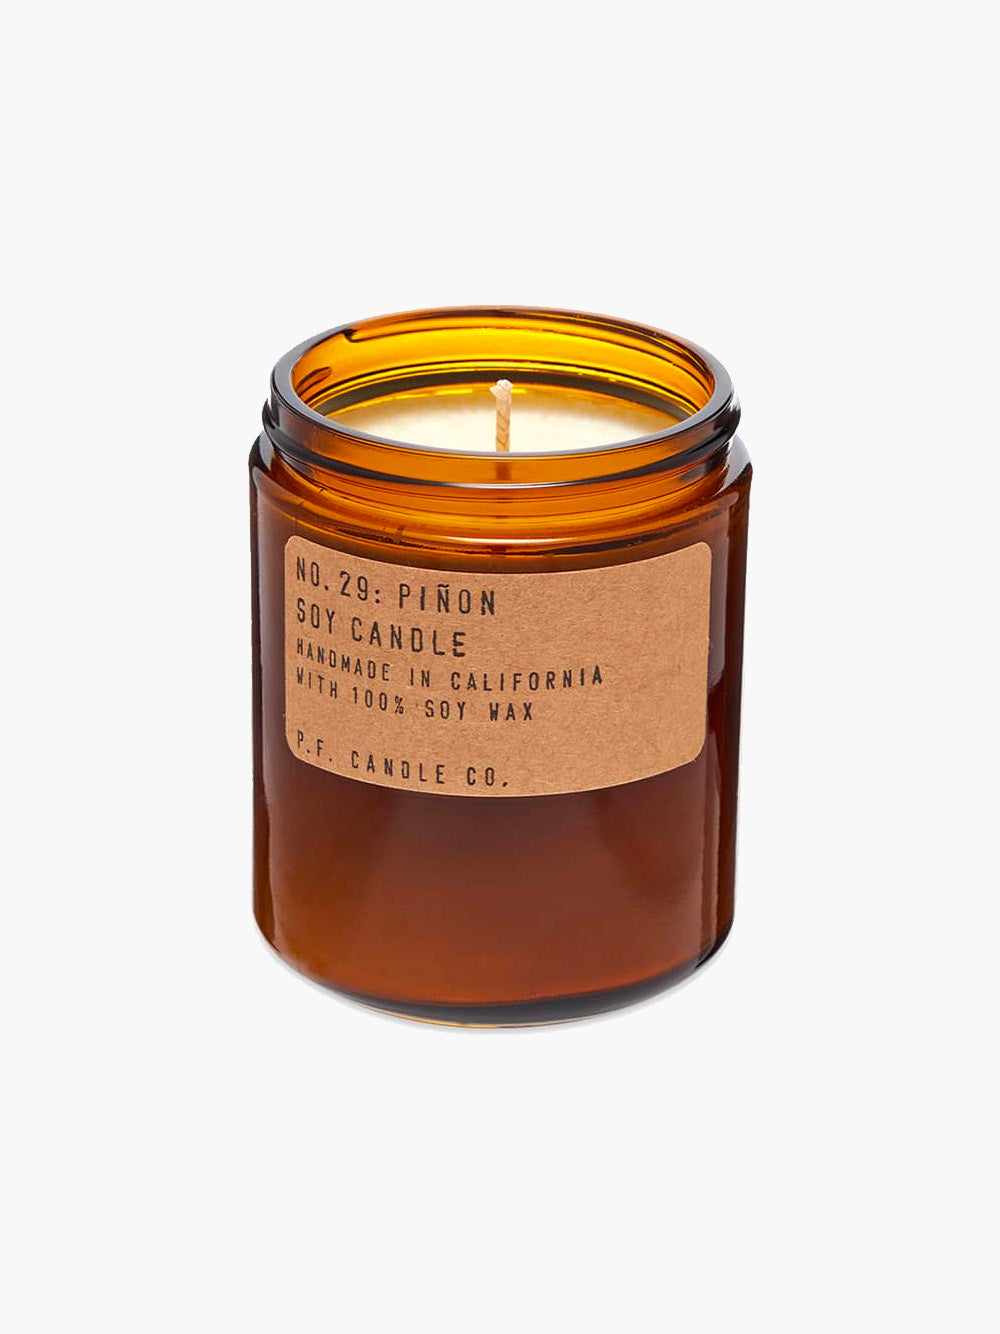 P.F. Candle Co. 204g Soy Candle - No.29 Pinon